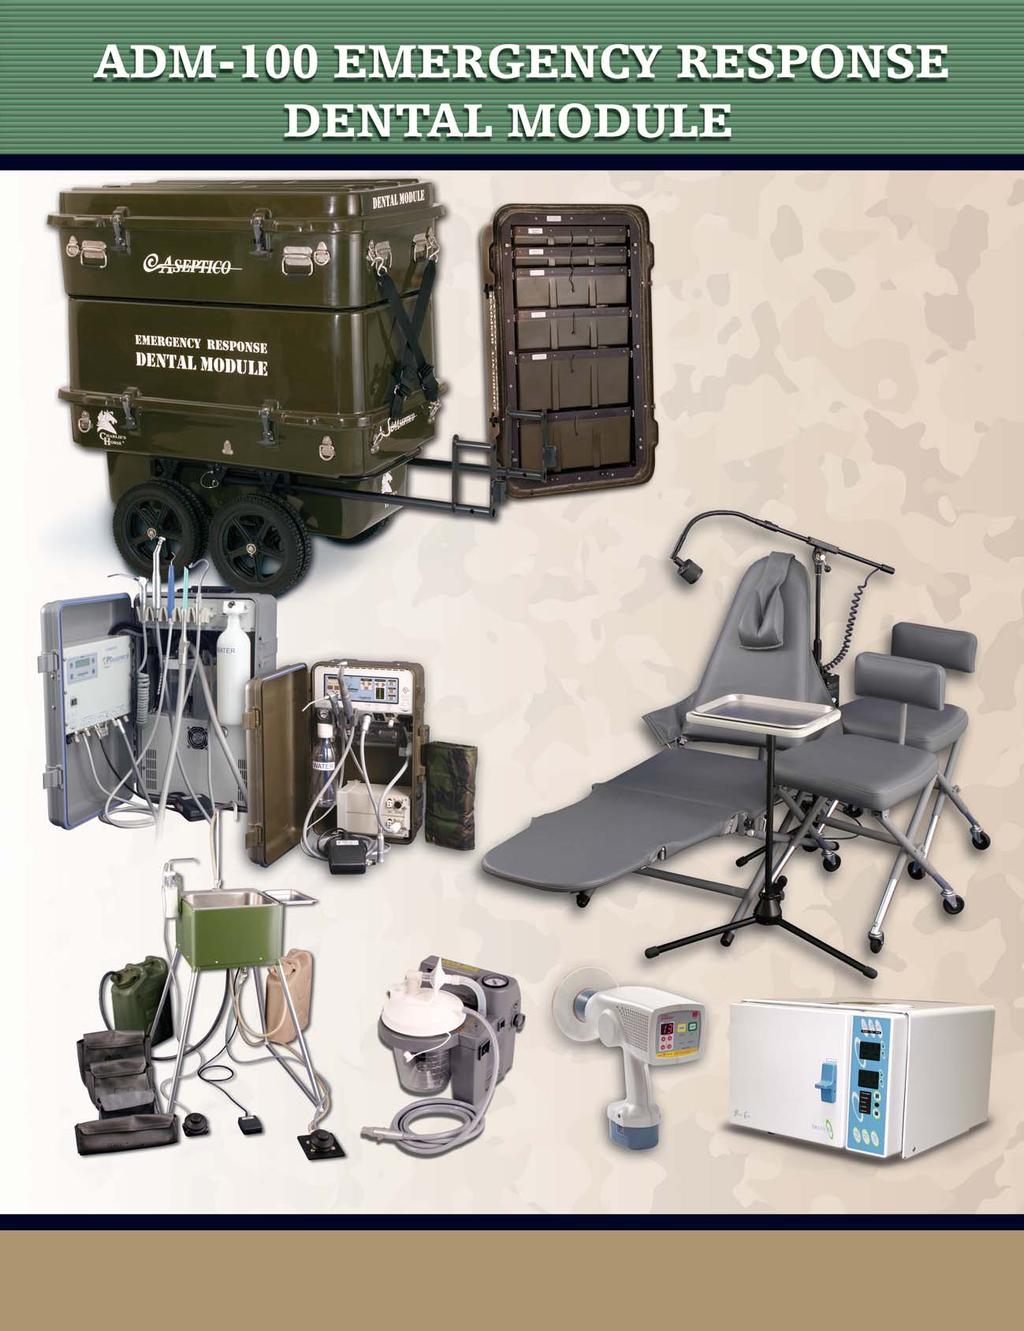 FEATURES Fully integrated & self-contained mobile dental treatment system Emergency preparedness for homeland security, natural disaster, civilian and military field use Large, integrated 6 drawer